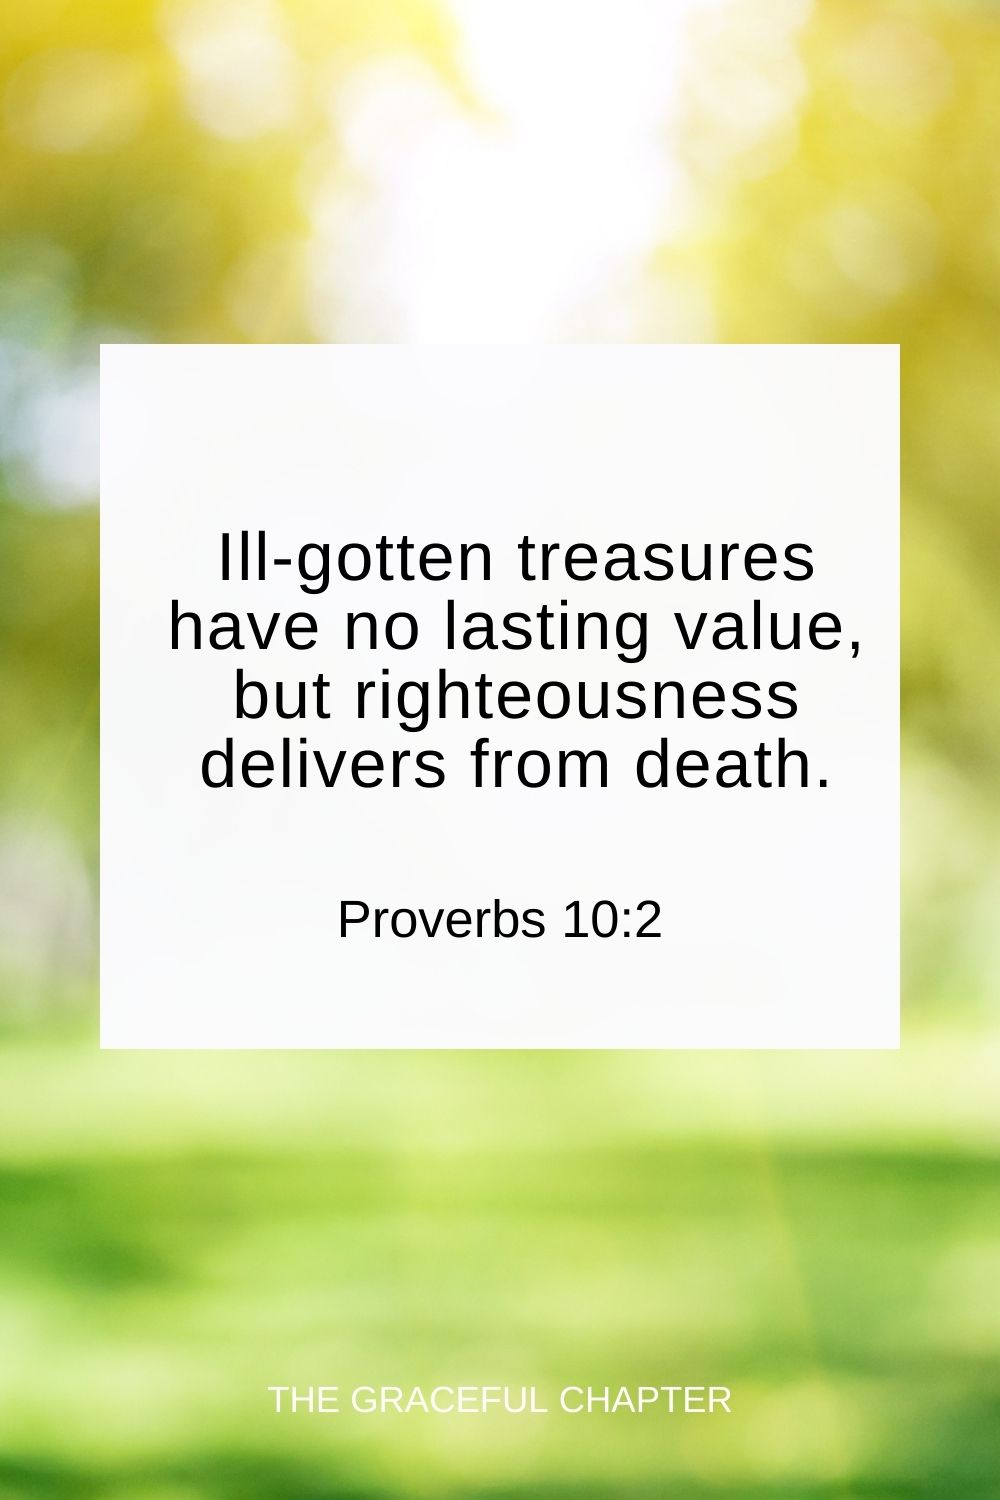 Ill-gotten treasures have no lasting value, but righteousness delivers from death. Proverbs 10:2